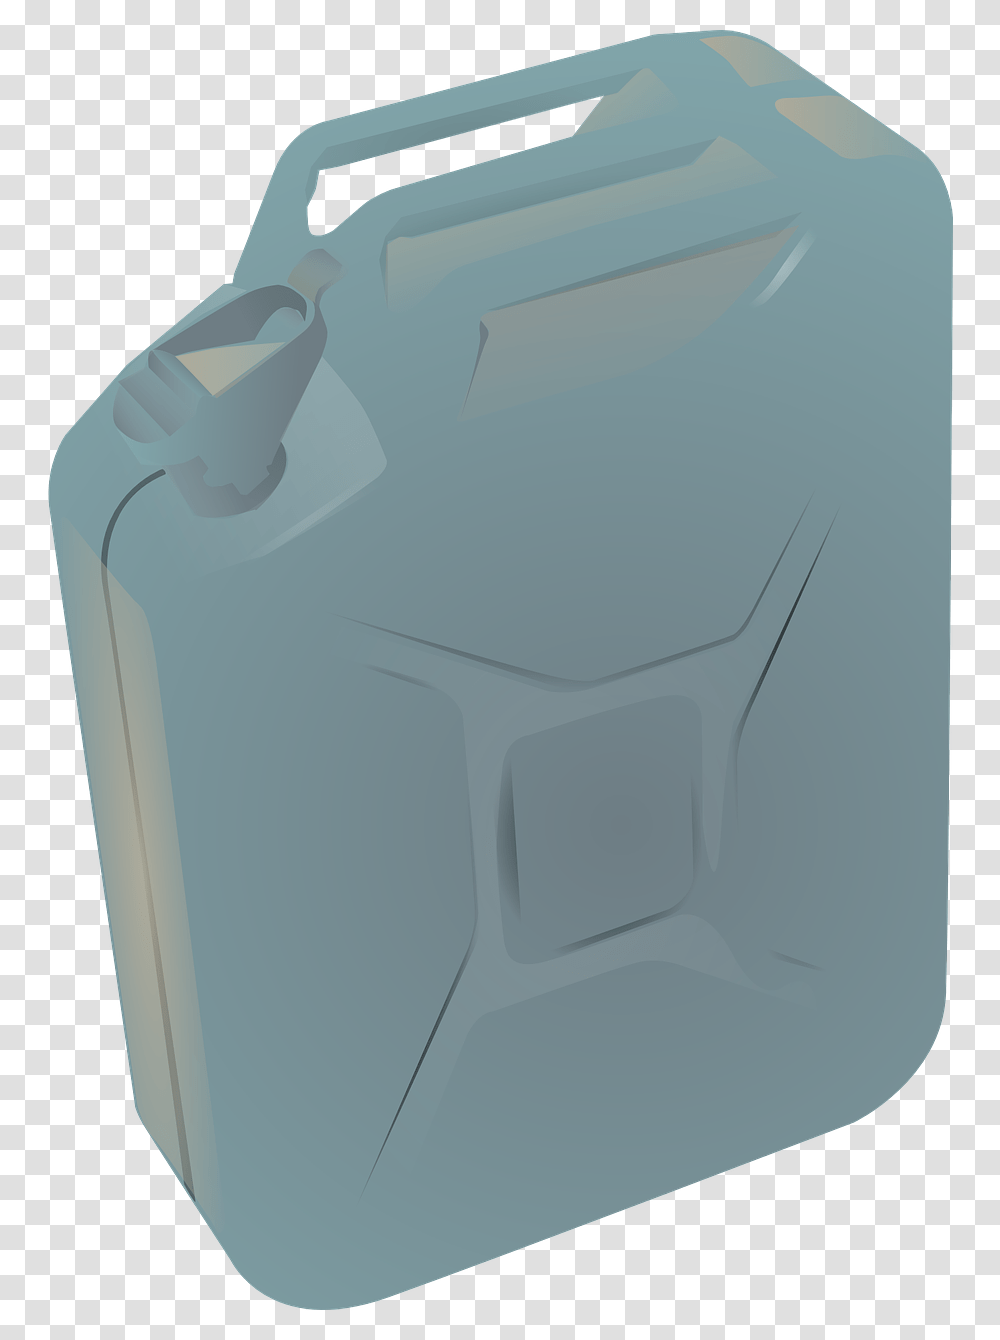 Fuel Container, Bag, Shopping Bag, Luggage, Plastic Bag Transparent Png